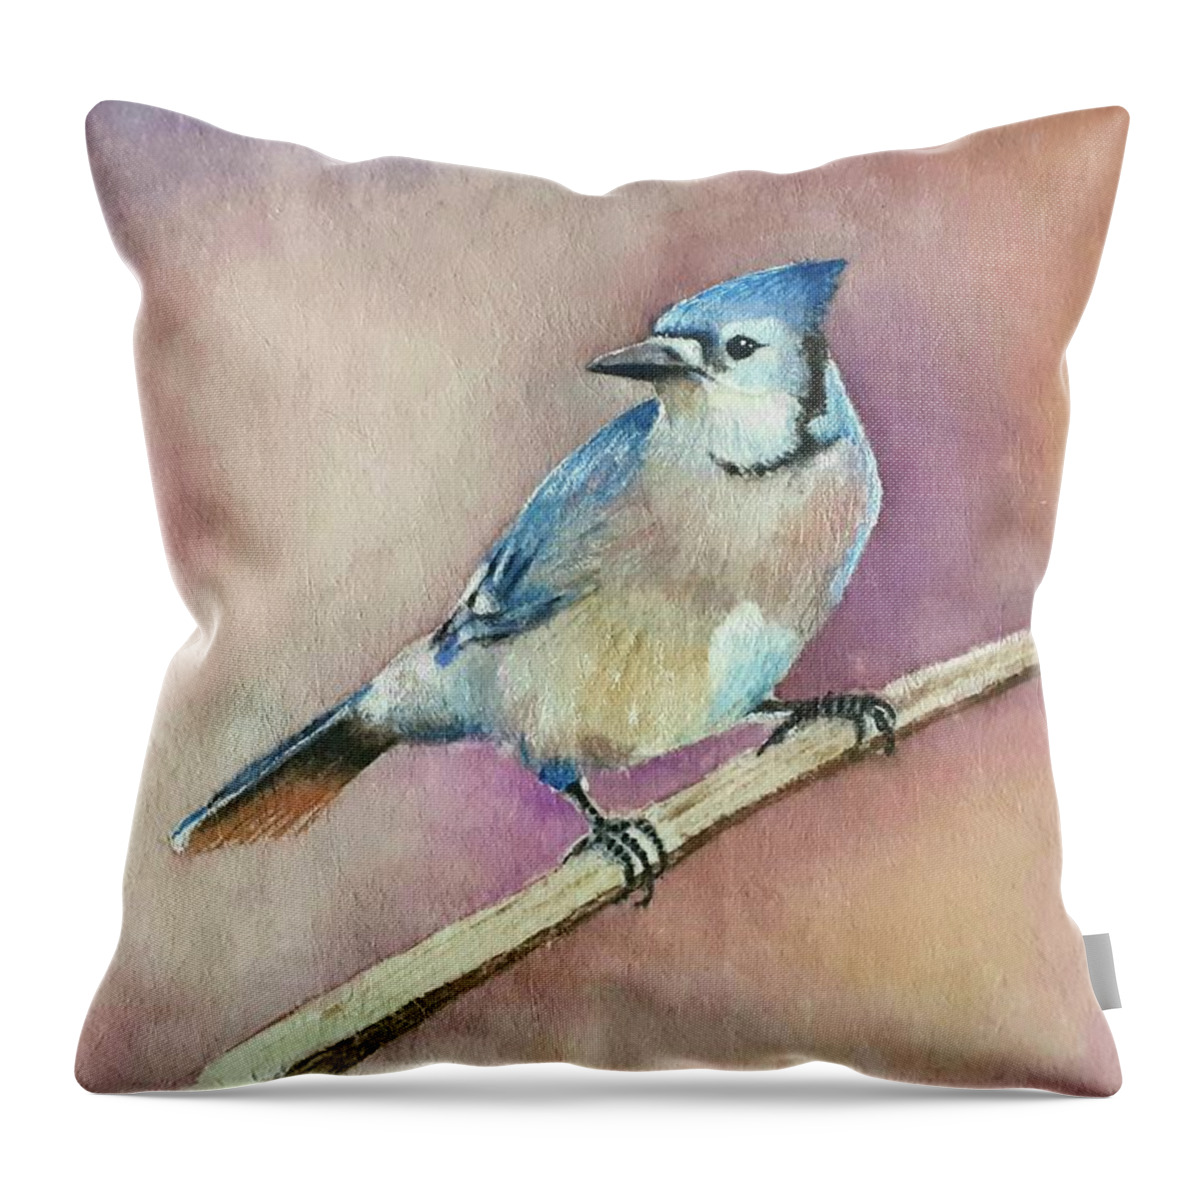 Watercolors Throw Pillow featuring the painting Blue jay by Carolina Prieto Moreno